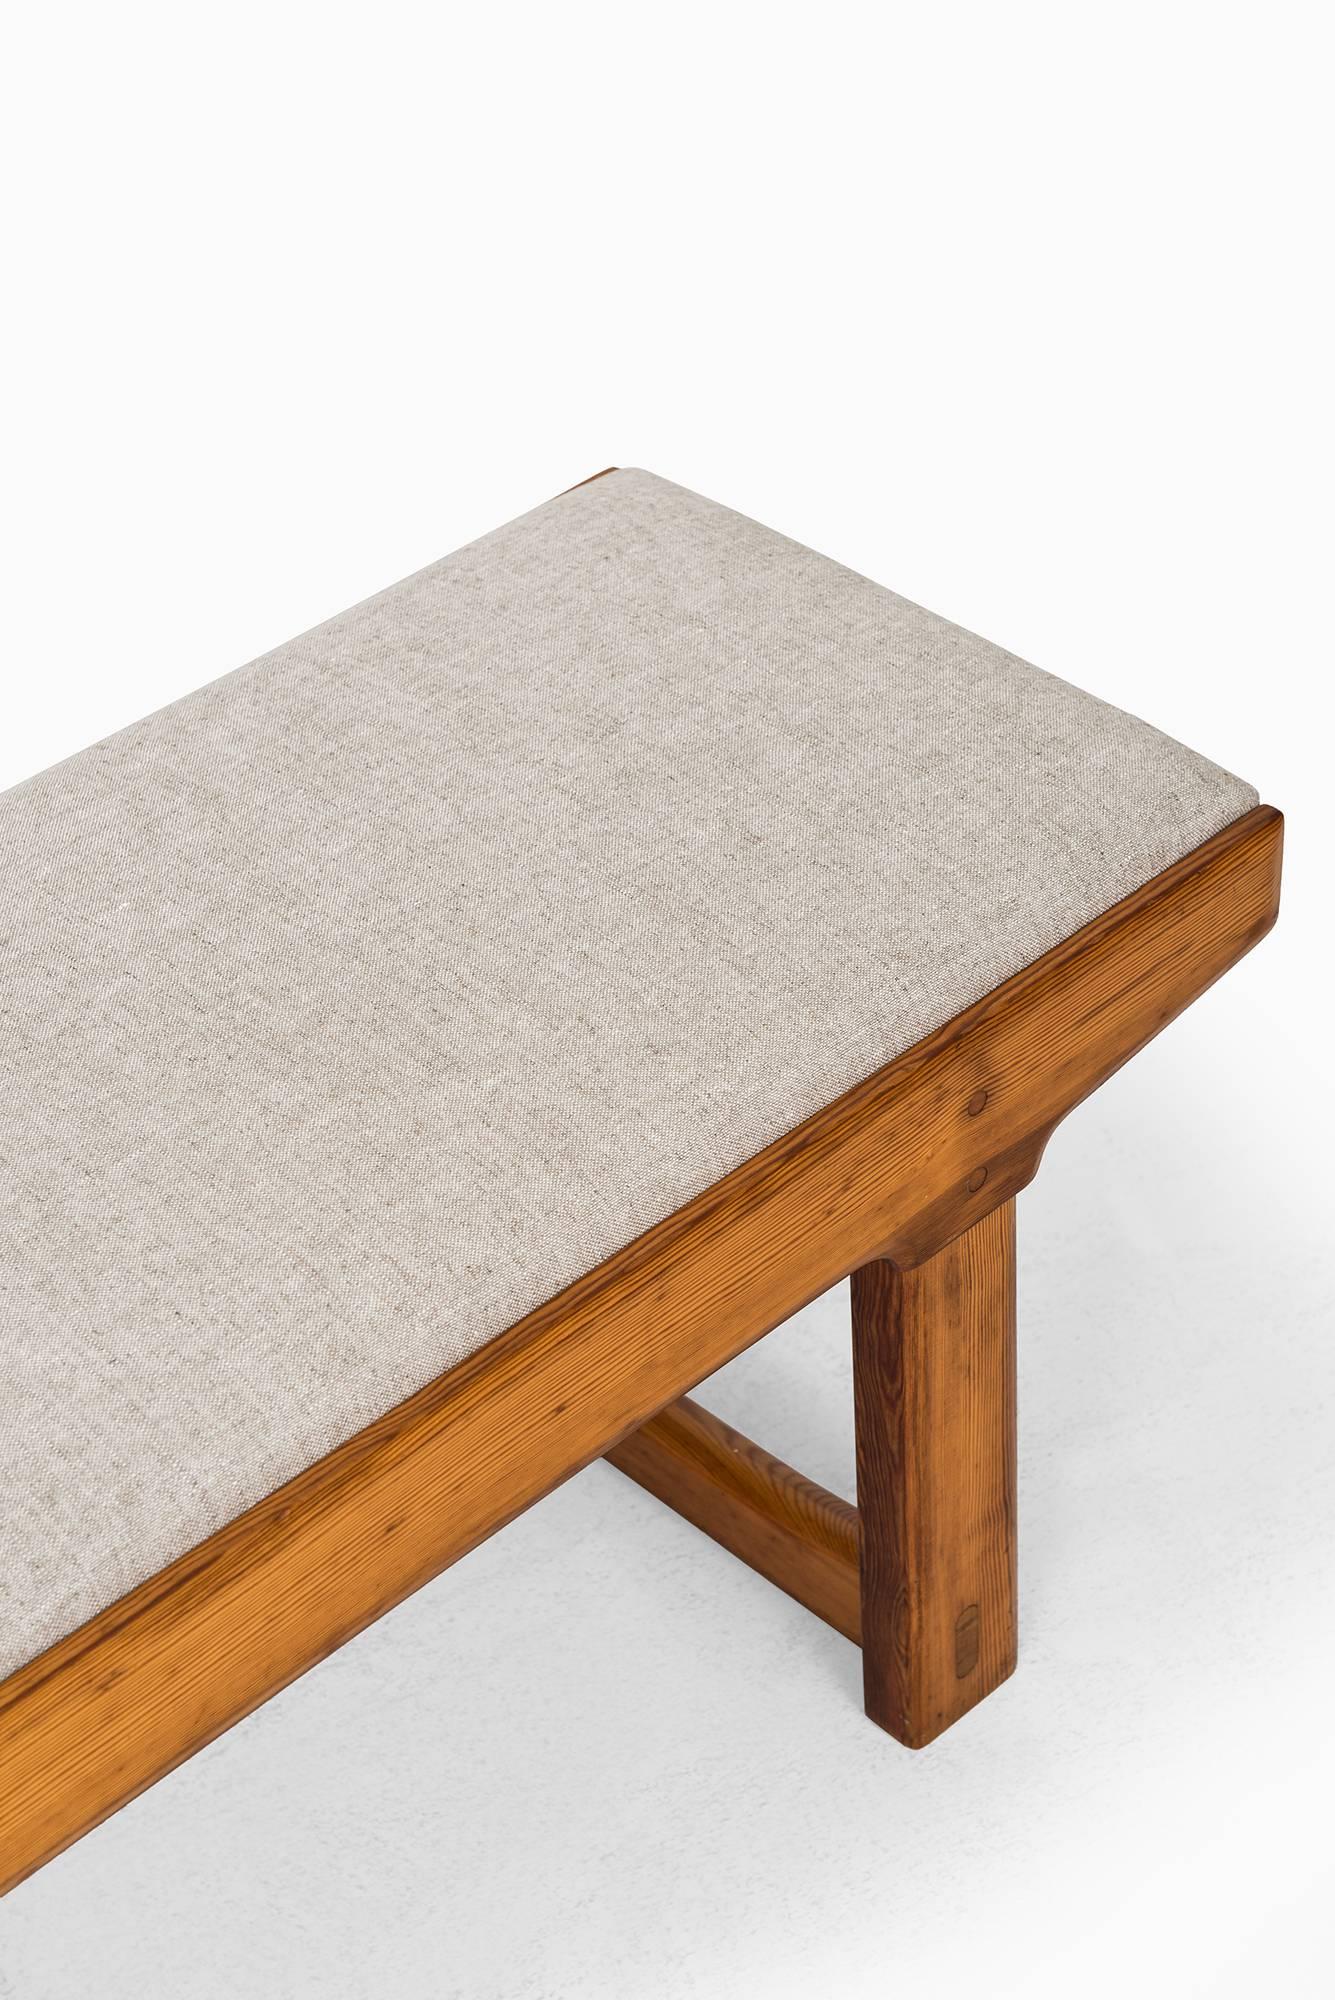 Mid-20th Century Bench in Oregon Pine and Linen Fabric Produced in Sweden